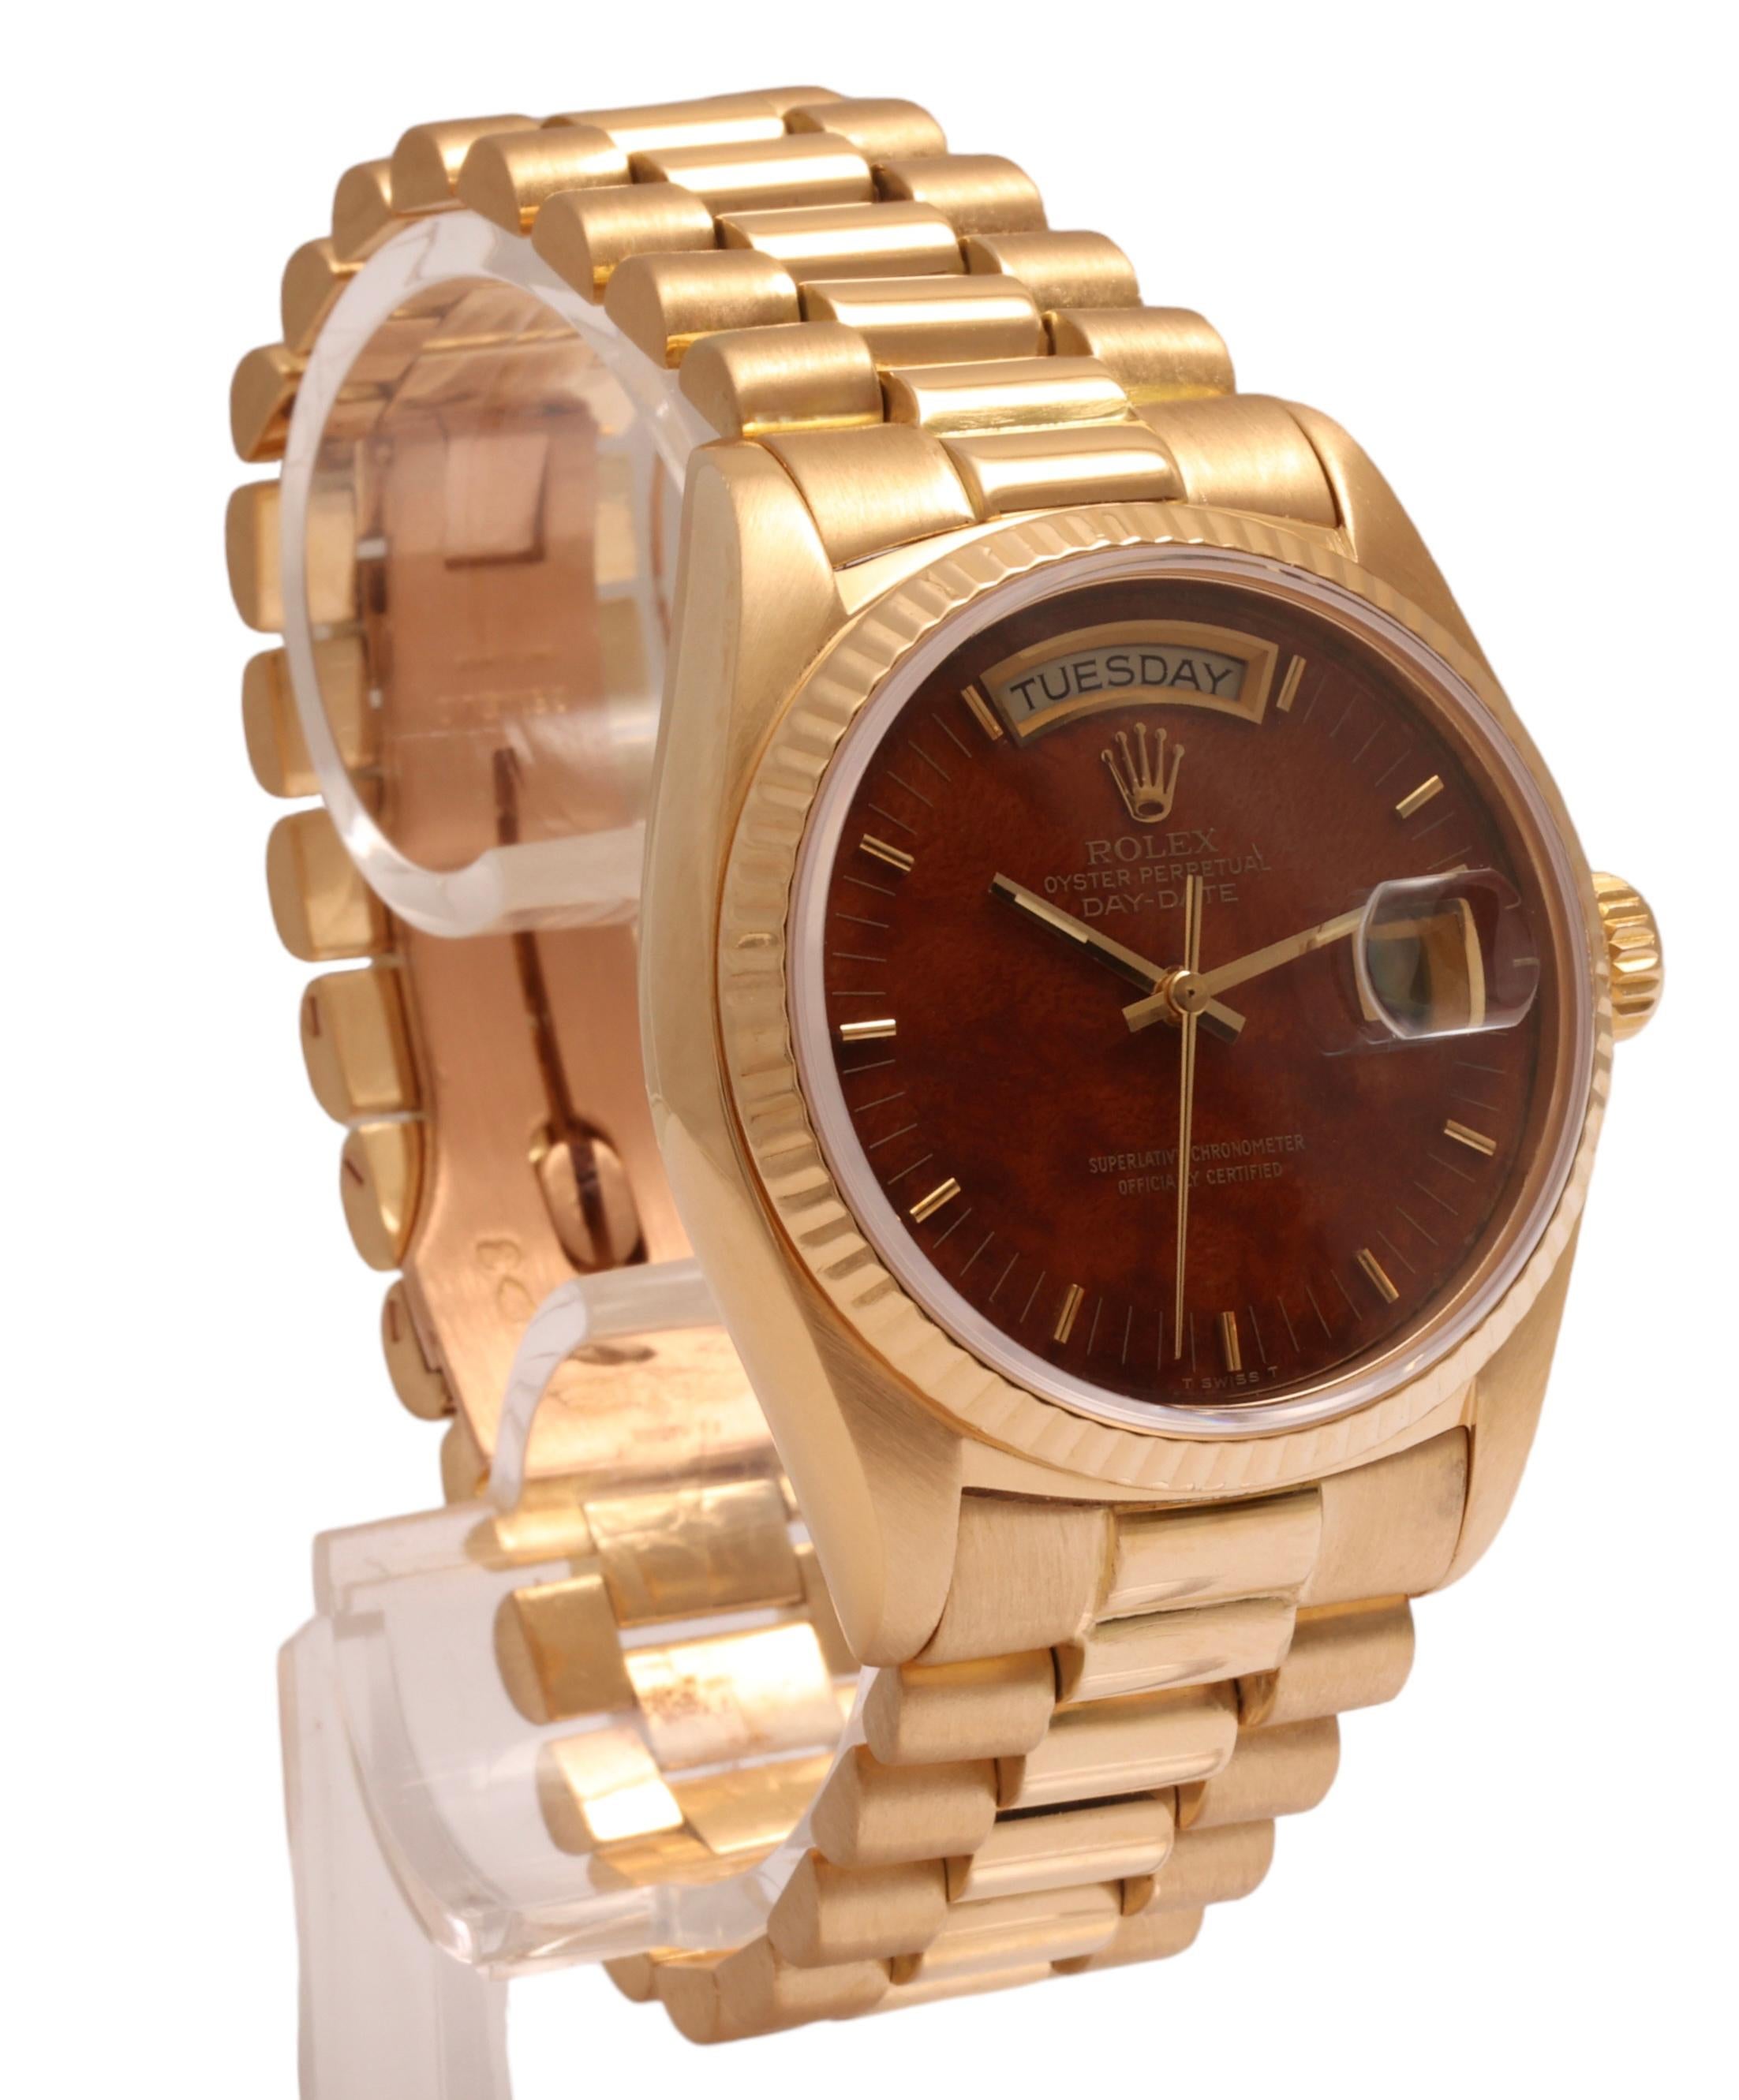 18 Kt Collectors Rolex President Wood Dial, Ref 18038 from 1978 For Sale 1